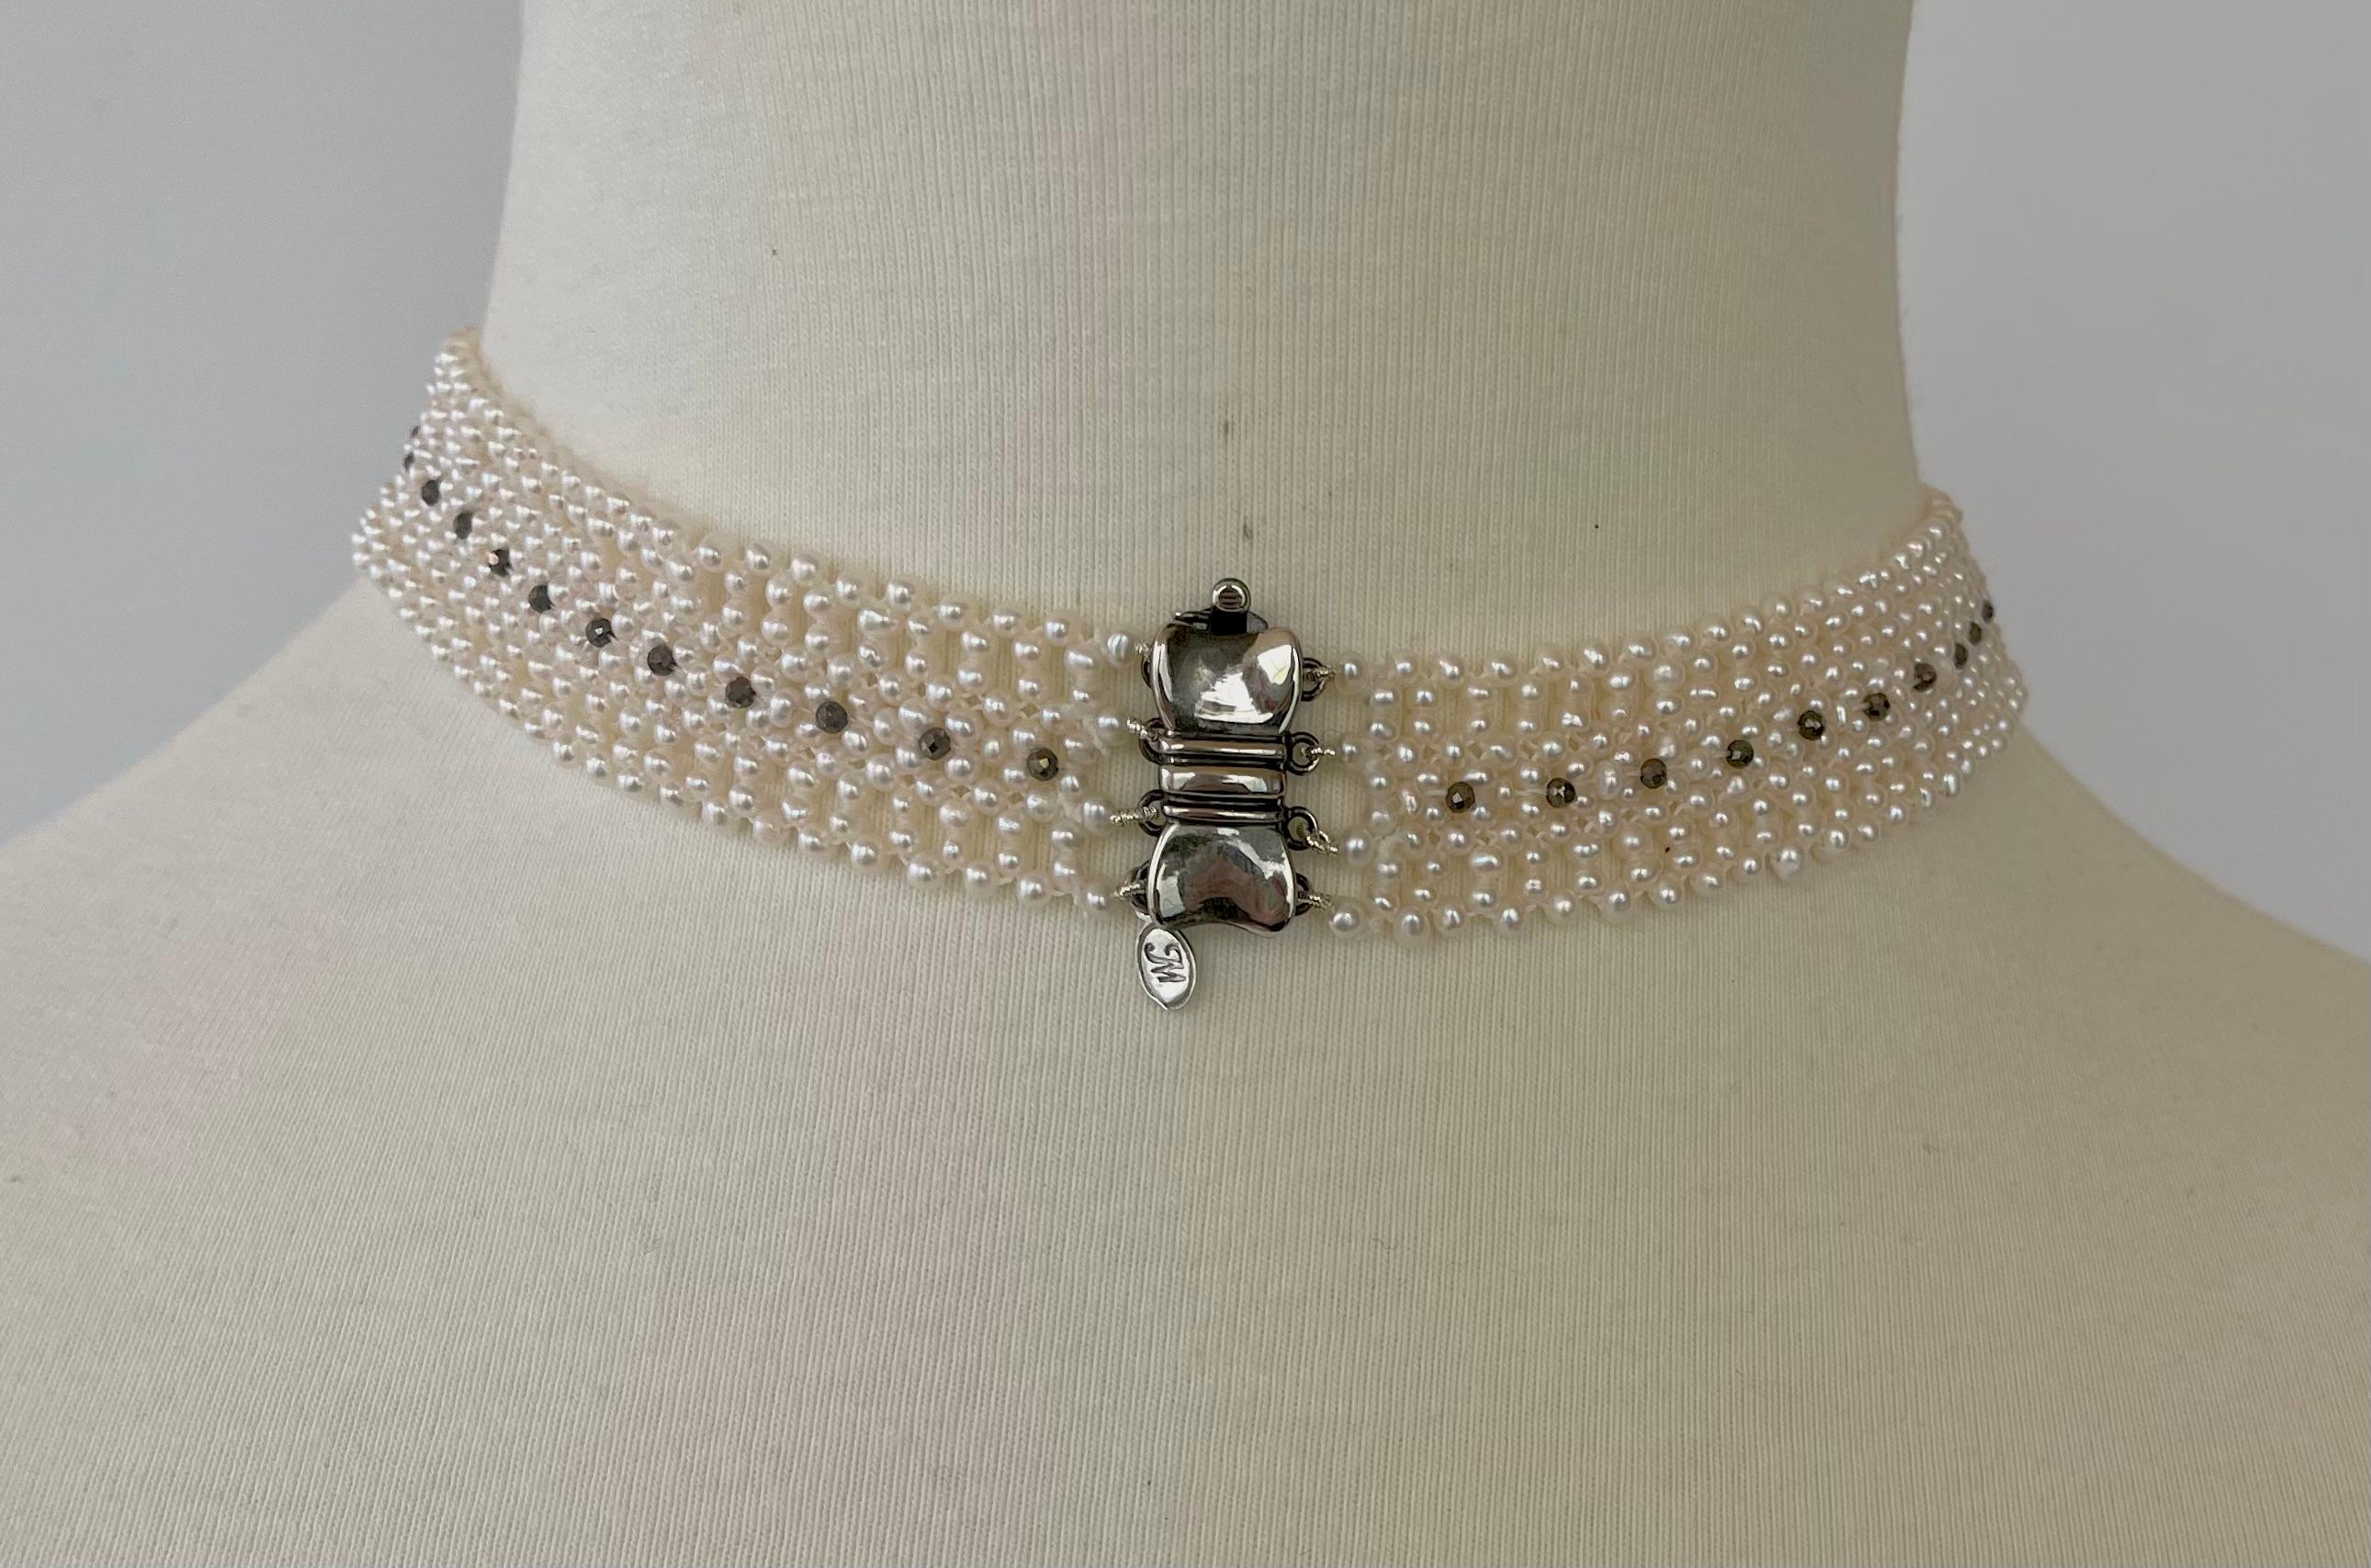 Marina J. Woven Pearl Necklace with Vintage Silver Centerpiece and Black Spinnel For Sale 5